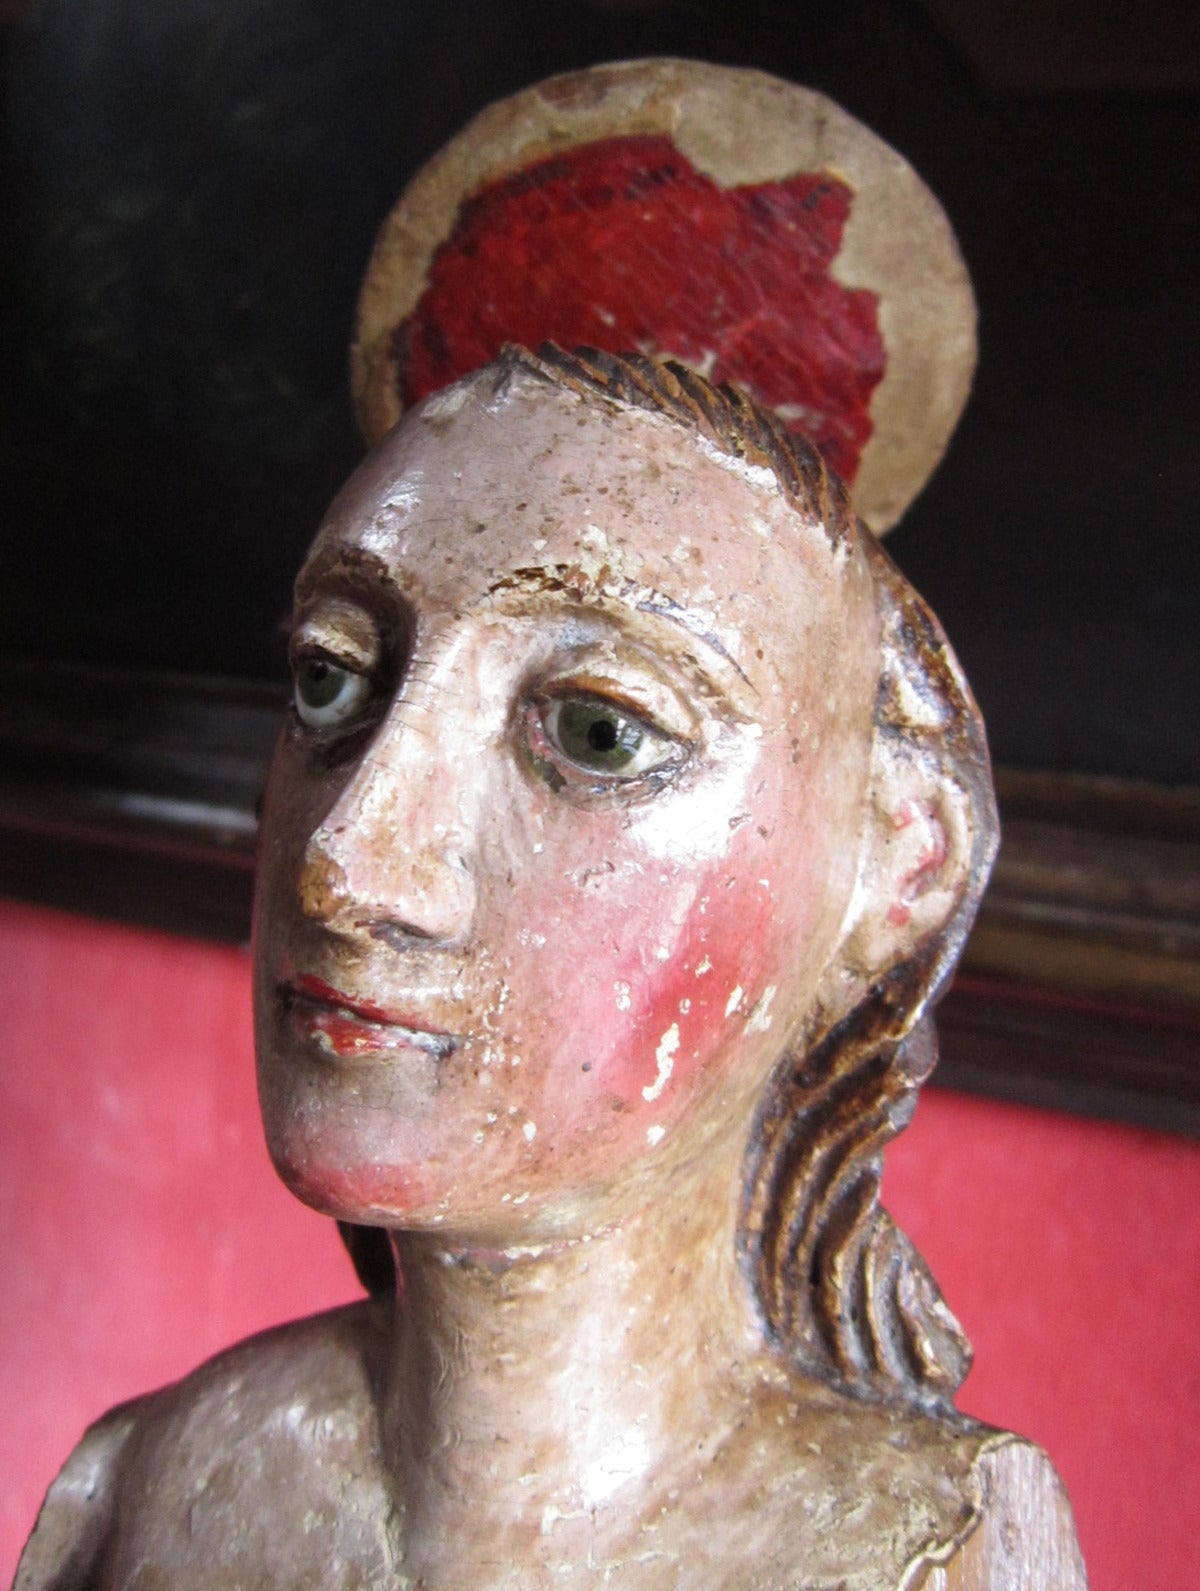 This polychromed statue is from 18th C. New Spain, now Mexico.  The glass eyes help project the saintly facial expression, that is representative of the colonial period.  Much of the original paint remains, most importantly on the face.  It was made